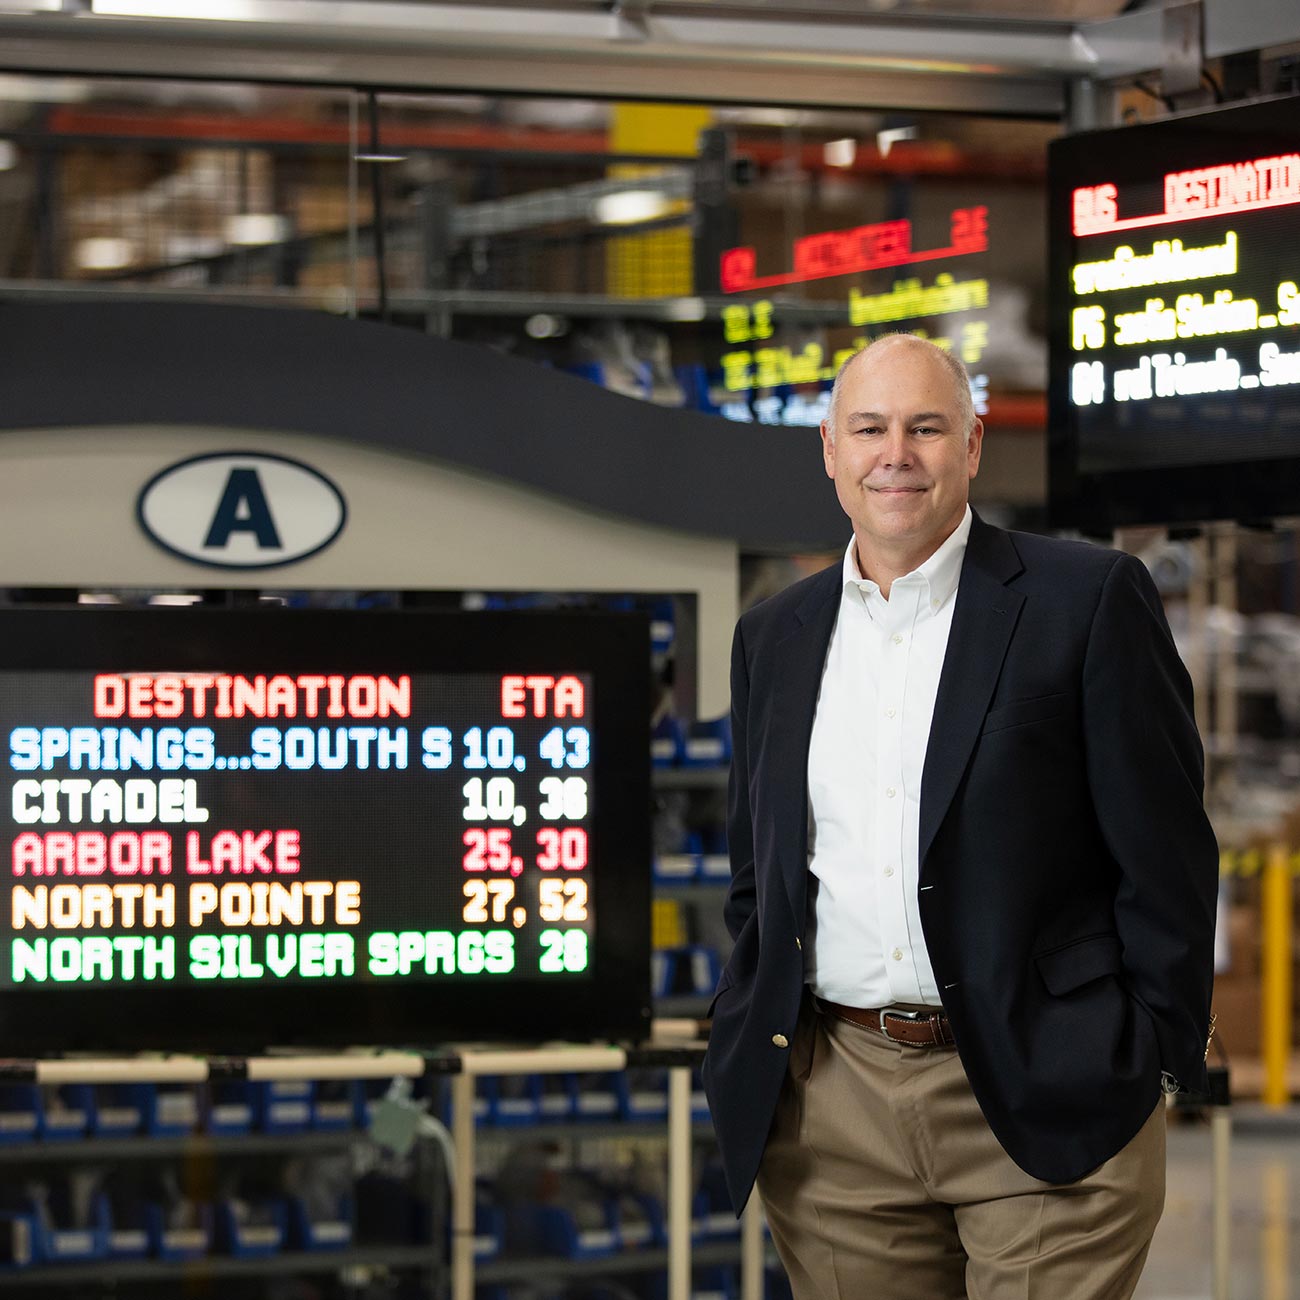 This Electronics Manufacturer in Plano is Driving the Mass Transit Industry Forward